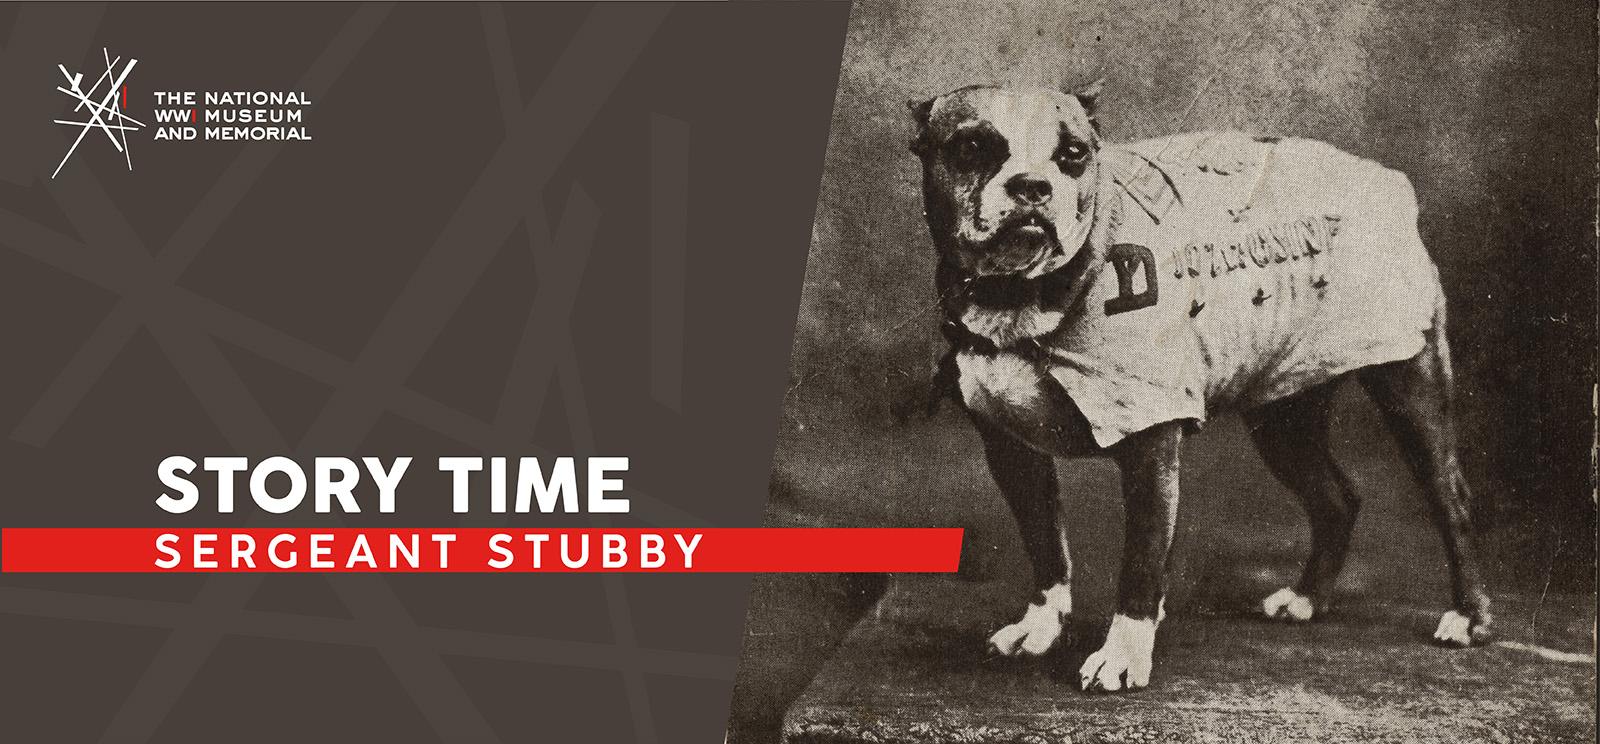 Image: black and white photograph of a Boston Terrier mutt wearing a coat posed against a studio backdrop. Text: 'Story Time / Sergeant Stubby'